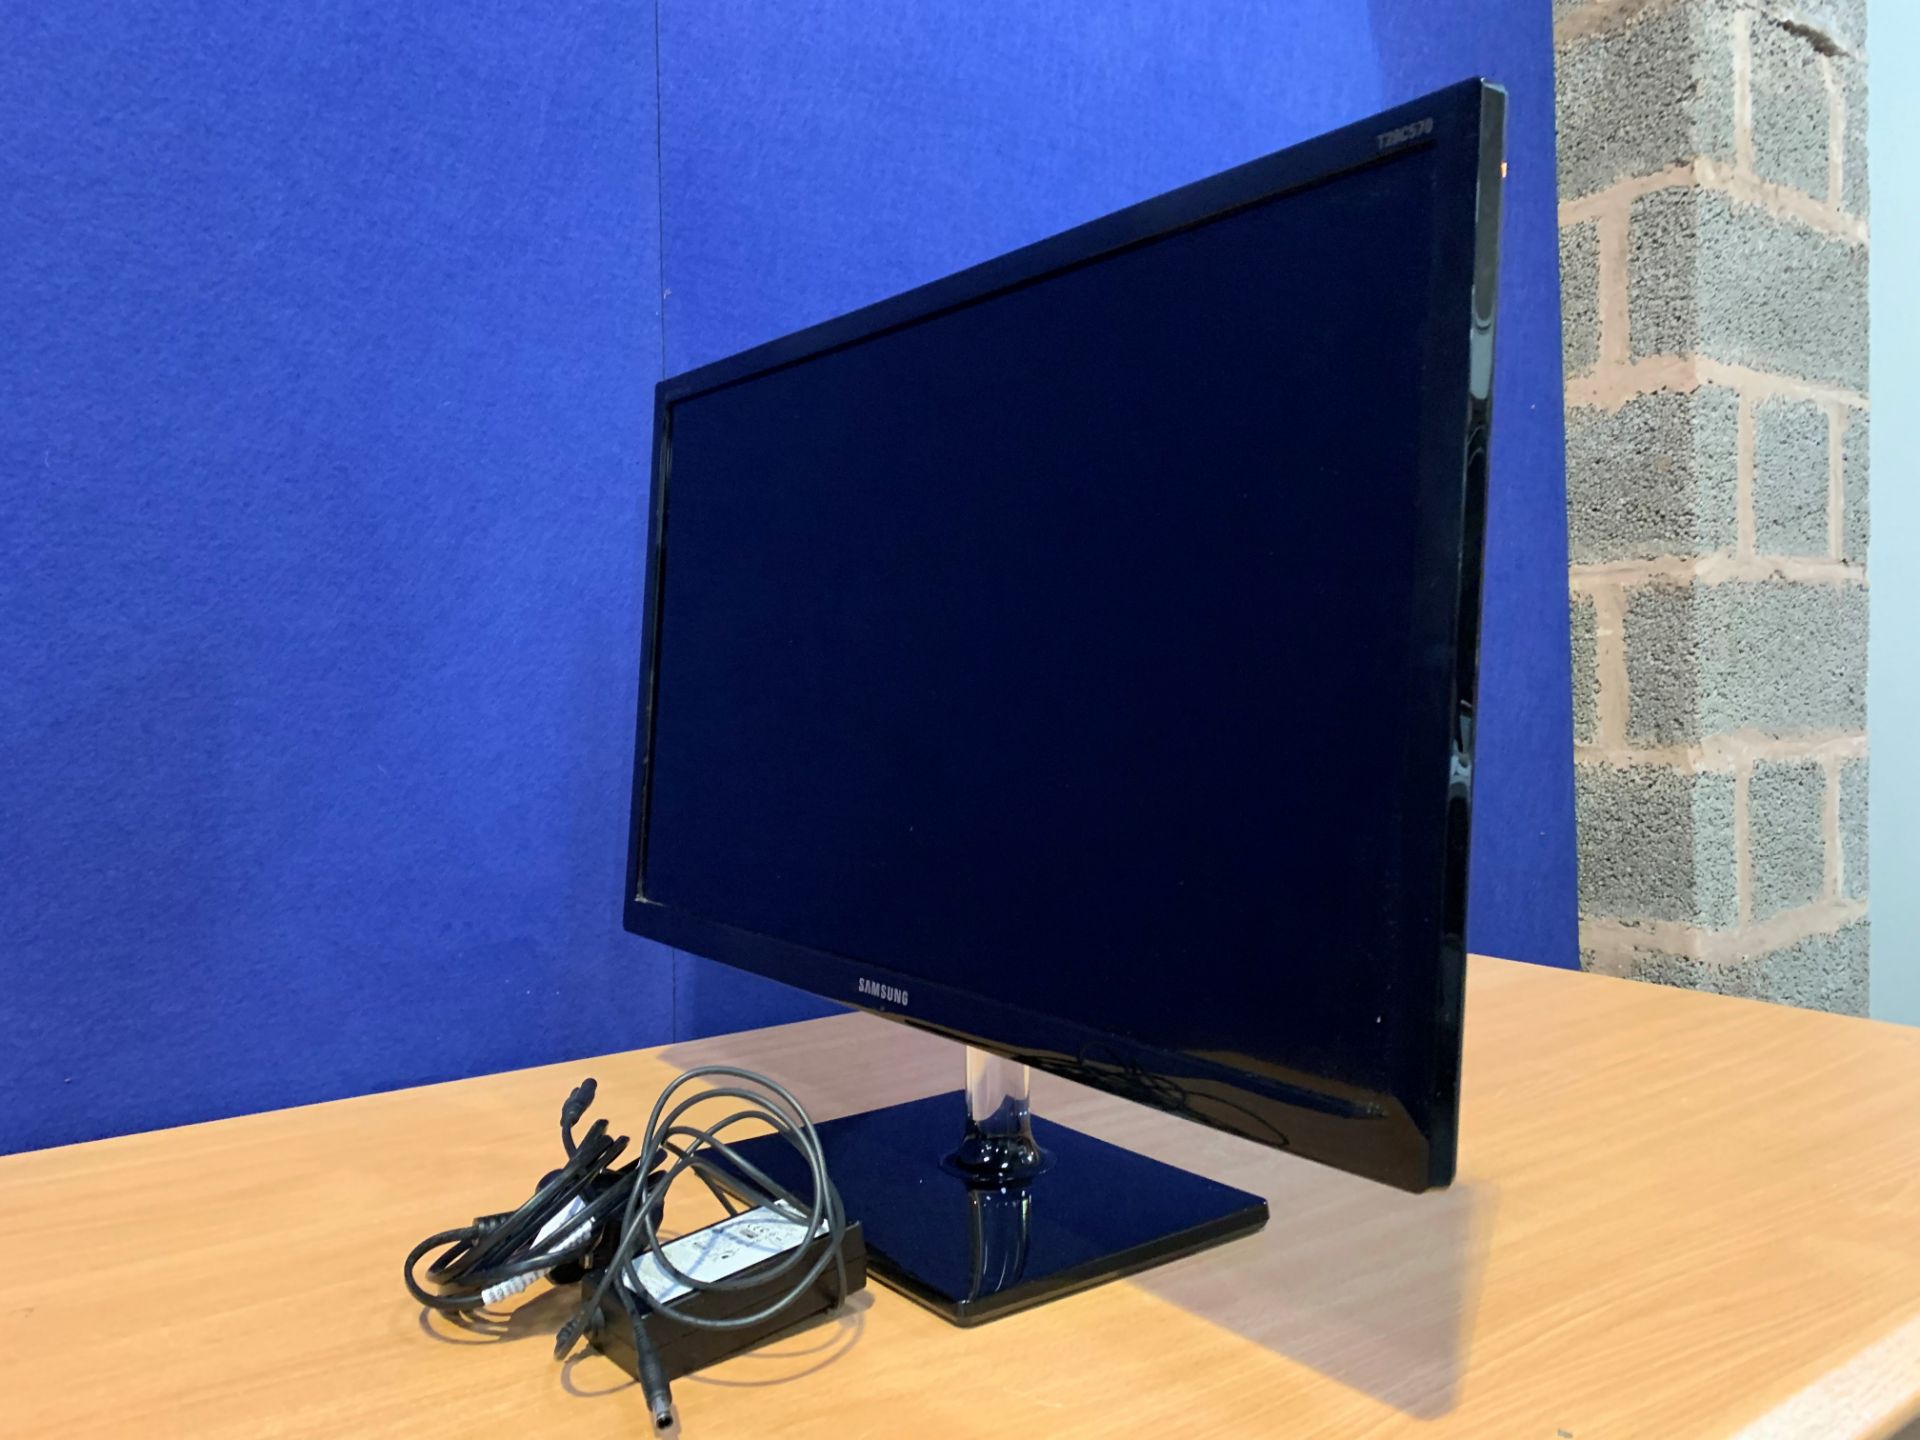 Samsung 28" 1920 X 1080 LED Screen with Wall & Desk Mount, Power Supply and Remote Control, 2 x - Image 4 of 4